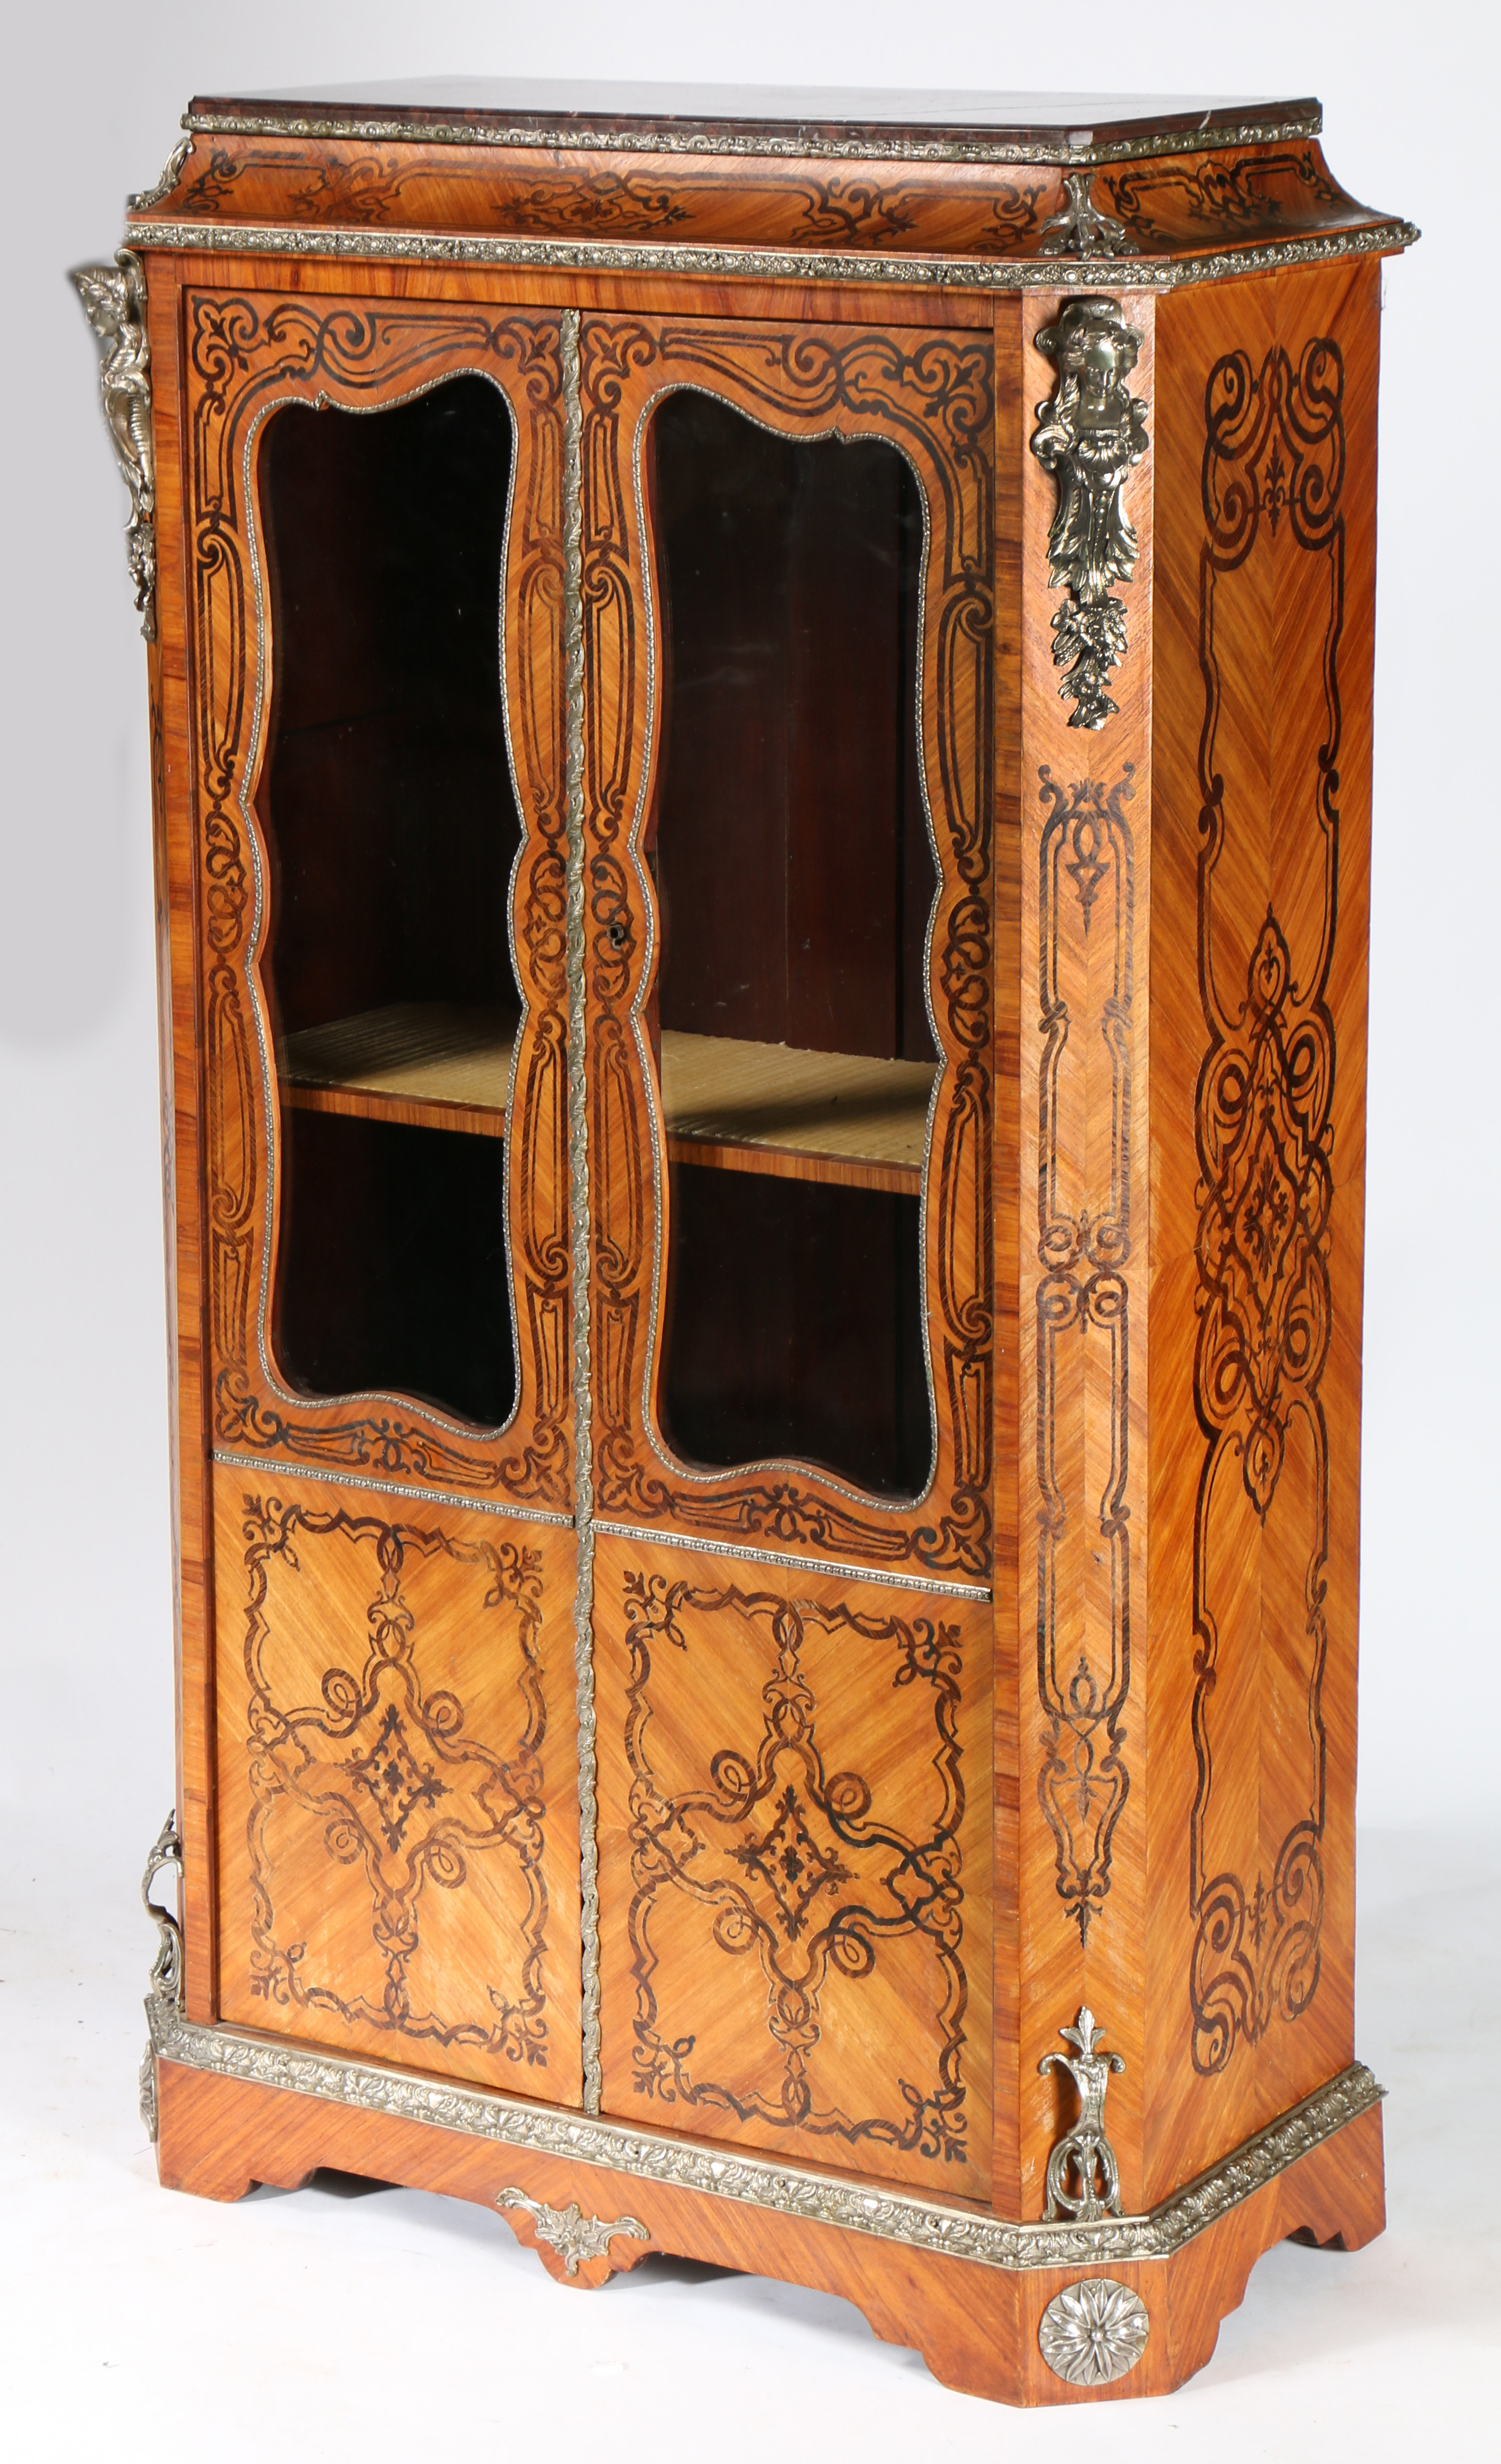 A 19TH CENTURY FRENCH KINGWOOD AND METAL MOUNTED DISPLAY CABINET. - Image 2 of 7